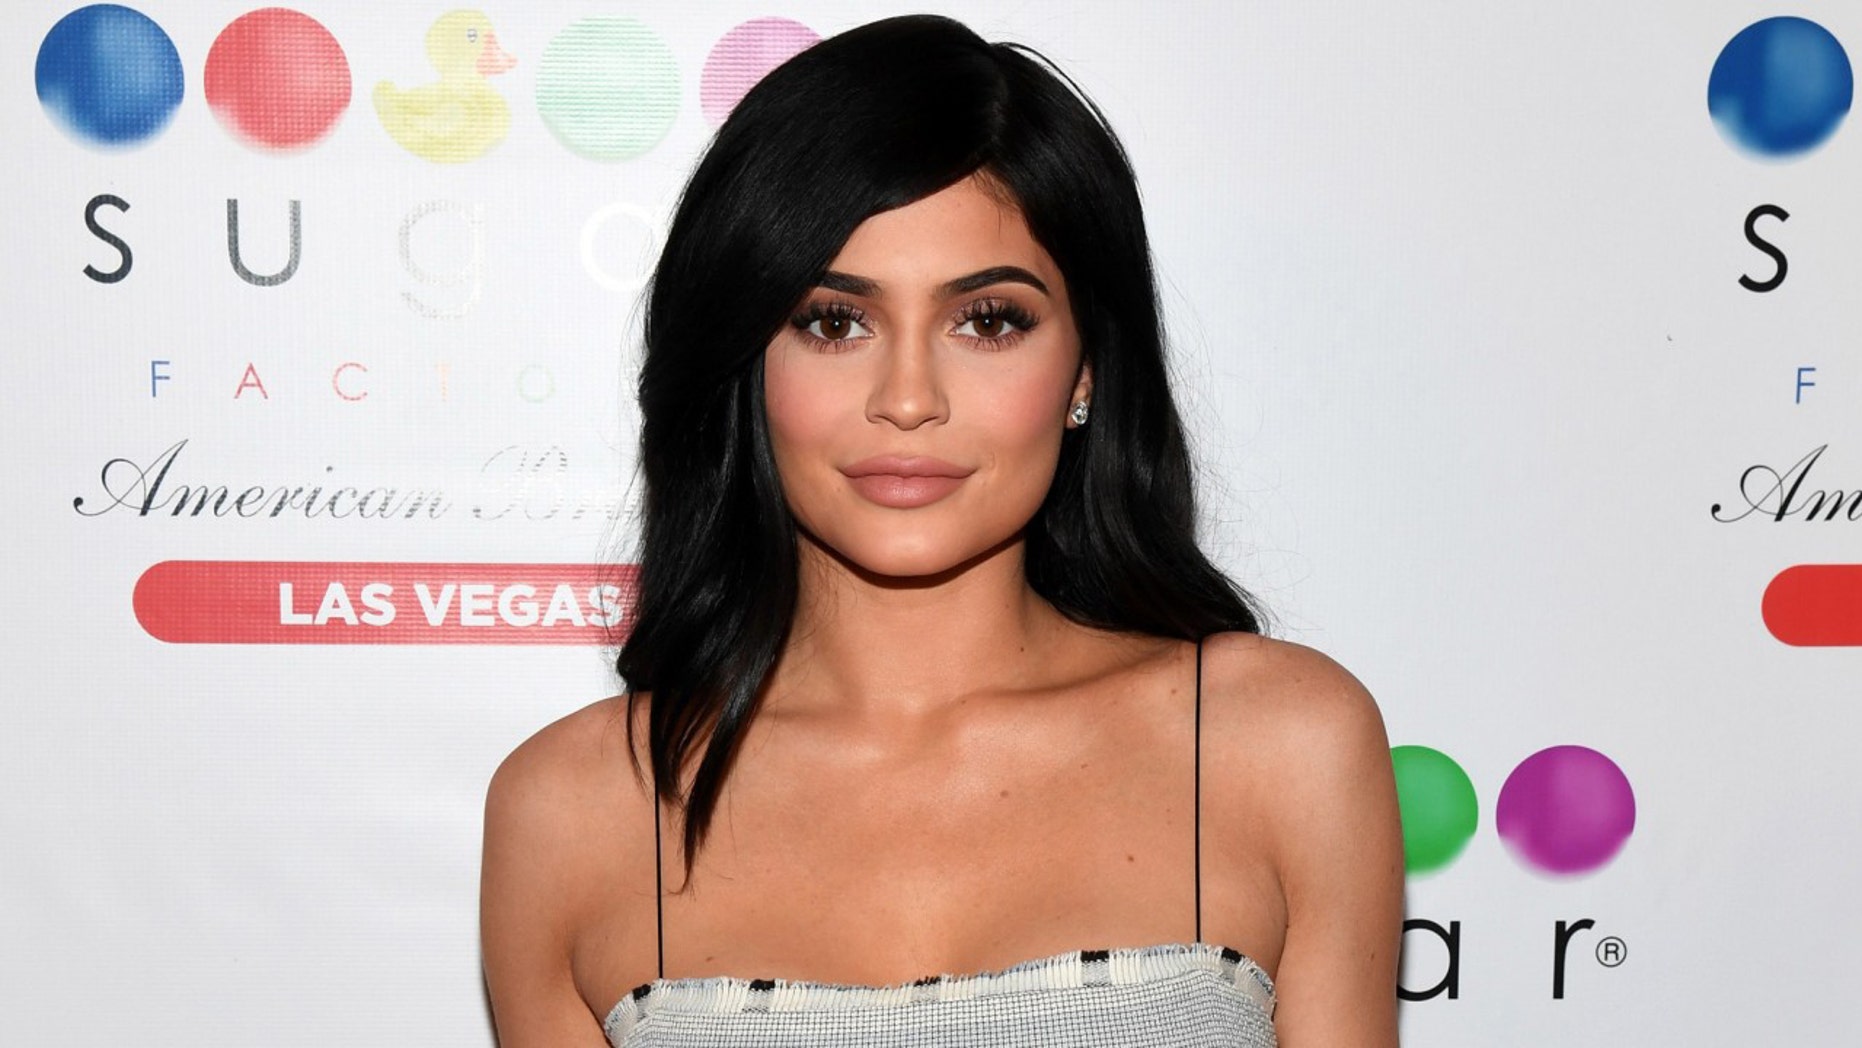 Kylie Jenner sets 'summer goals' with throwback bikini pic ...